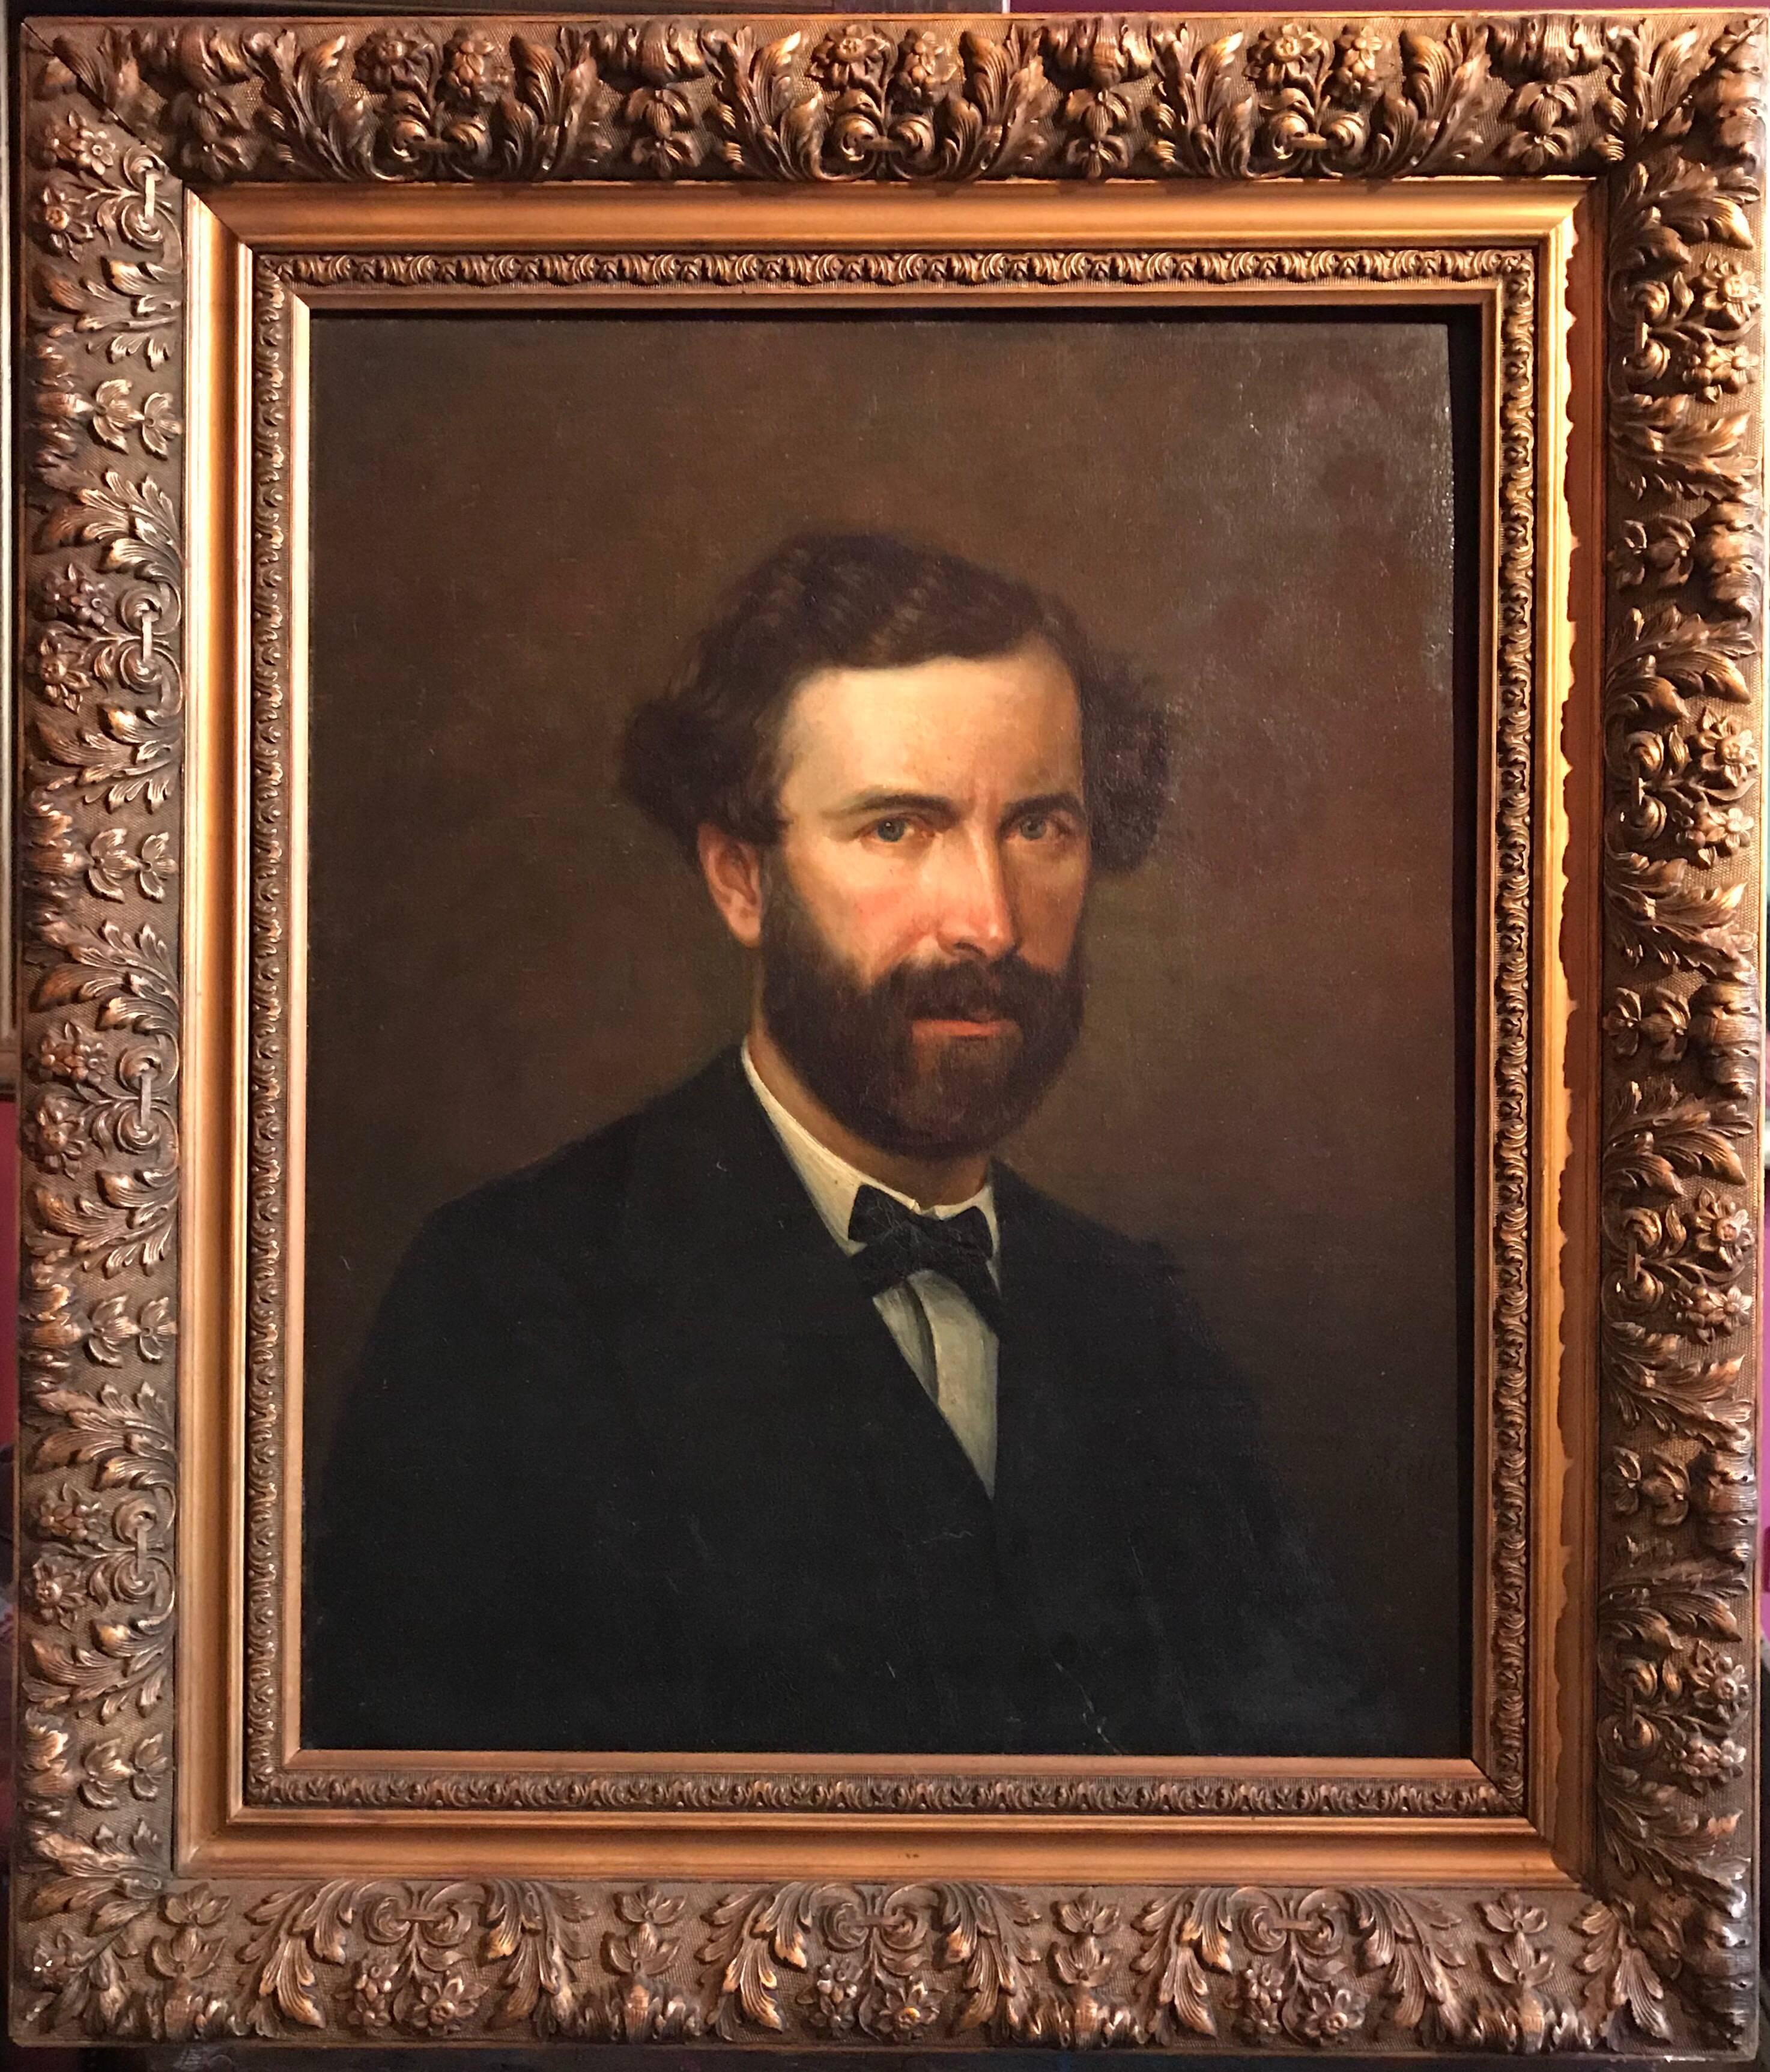 Unknown Figurative Painting - Portrait of an Artist, large 19th century oil painting